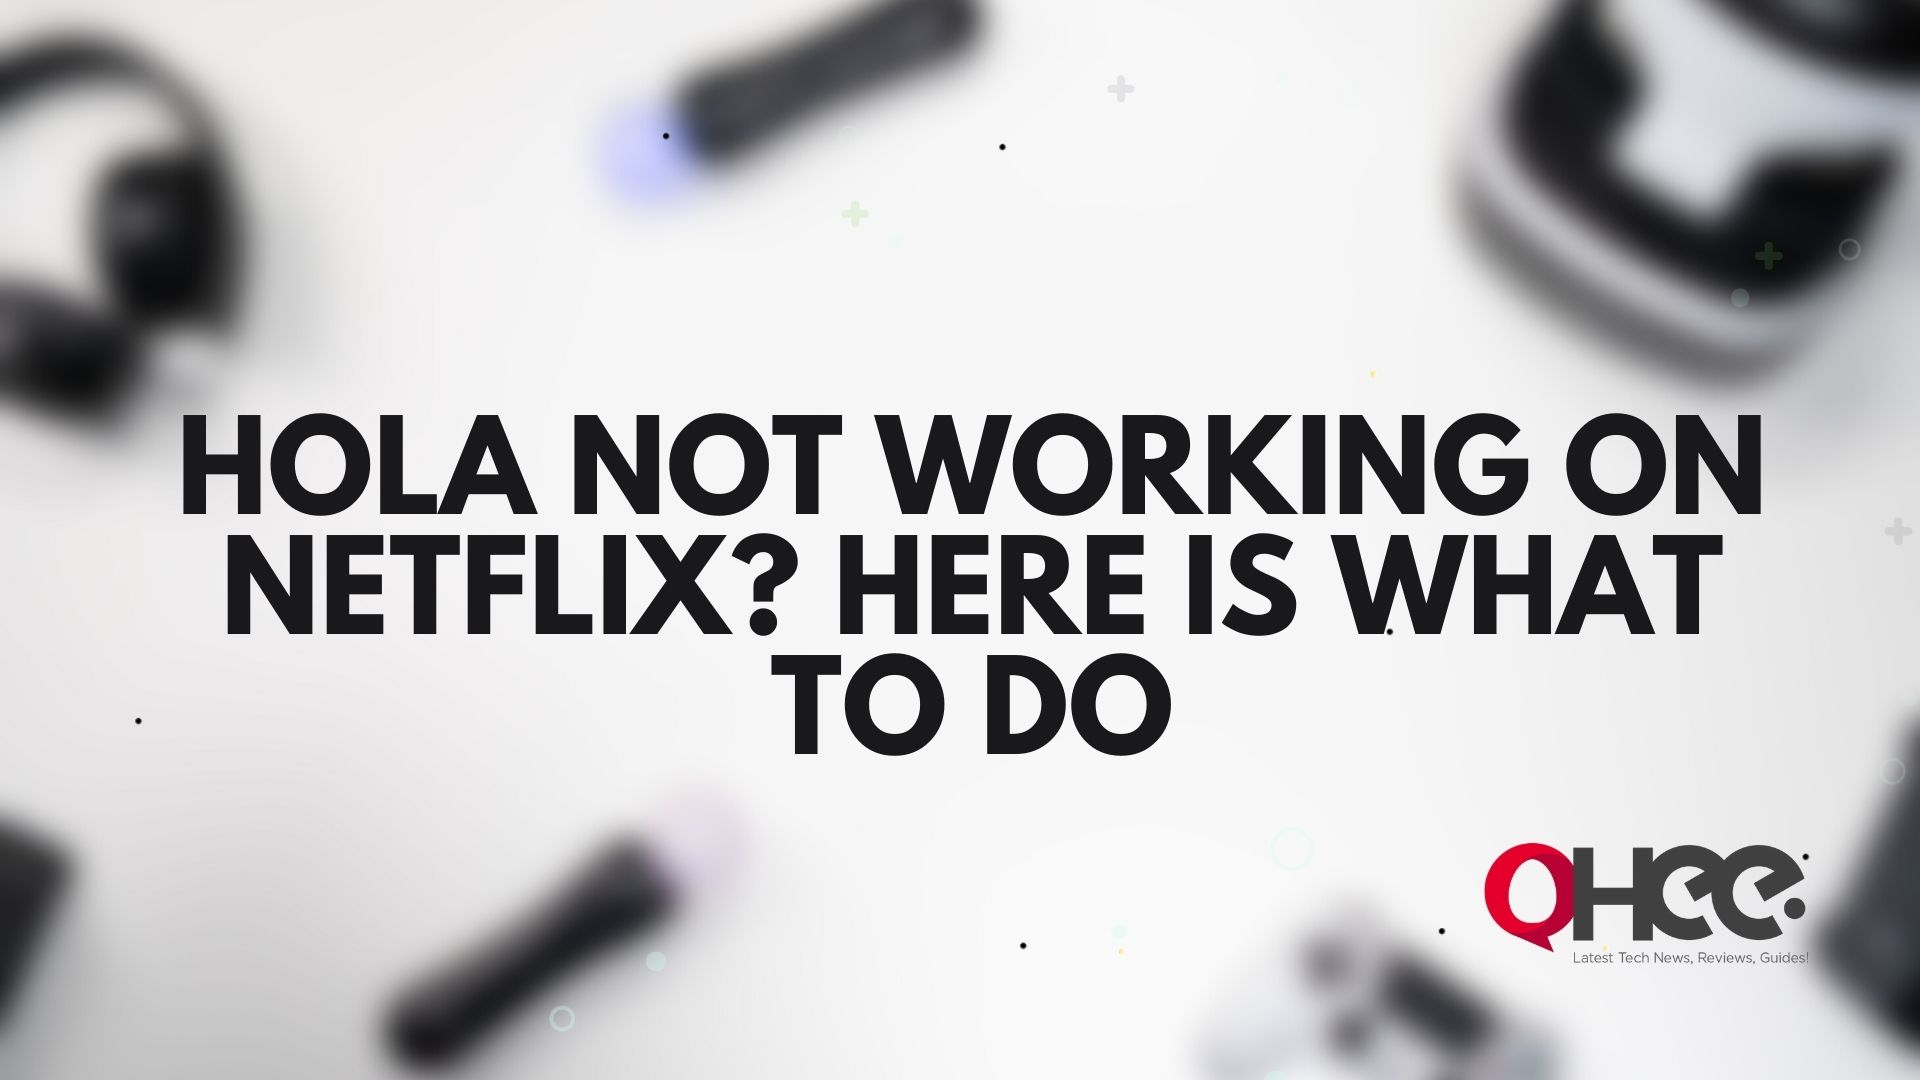 Hola Not Working On Netflix – What to do?